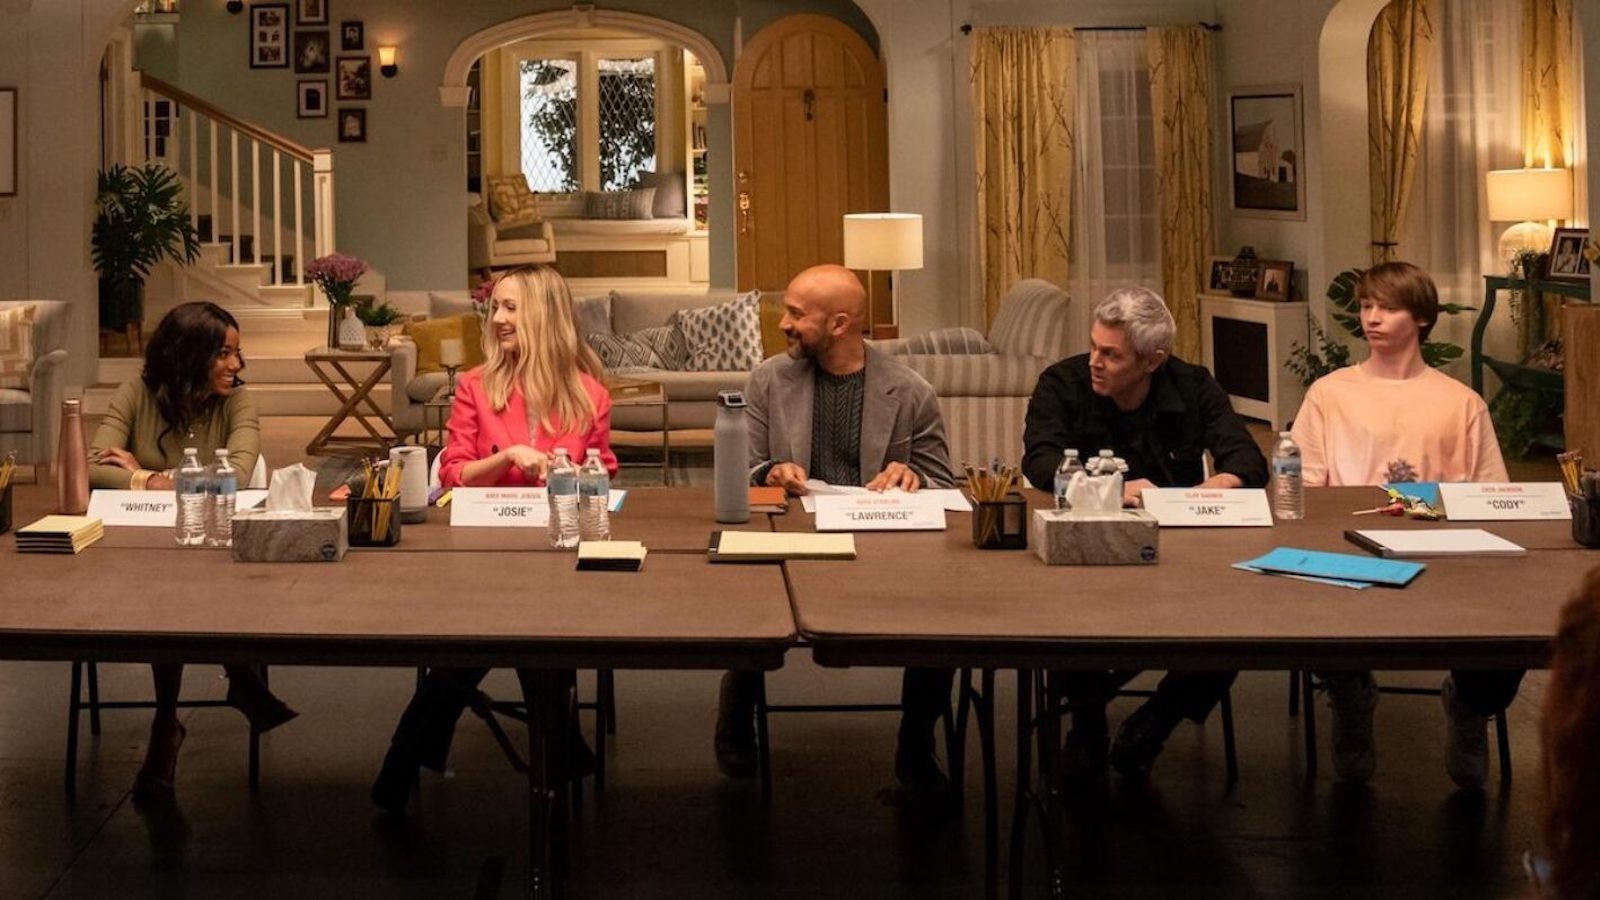 The Fictional Sitcom In Hulu's Reboot Recycled The Set From A Real Hit Sitcom [Exclusive] - /Film